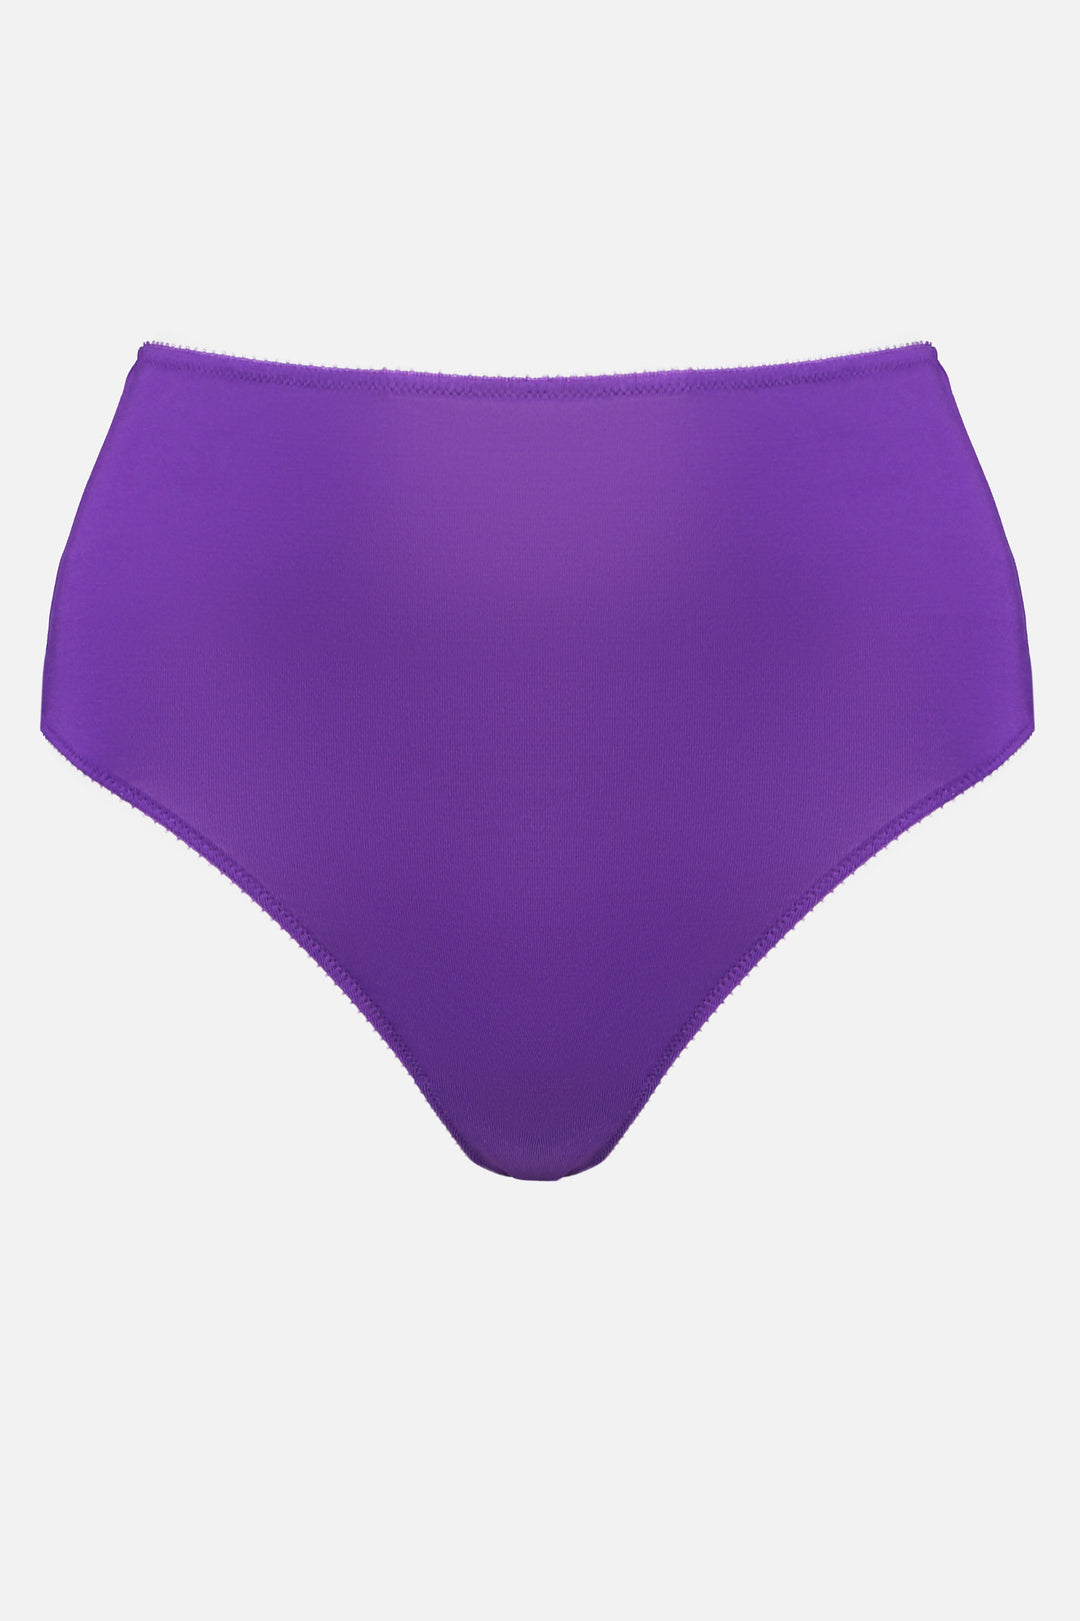 Videris Lingerie high waist knicker in purple TENCEL™ cut to follow the natural curve of your hips